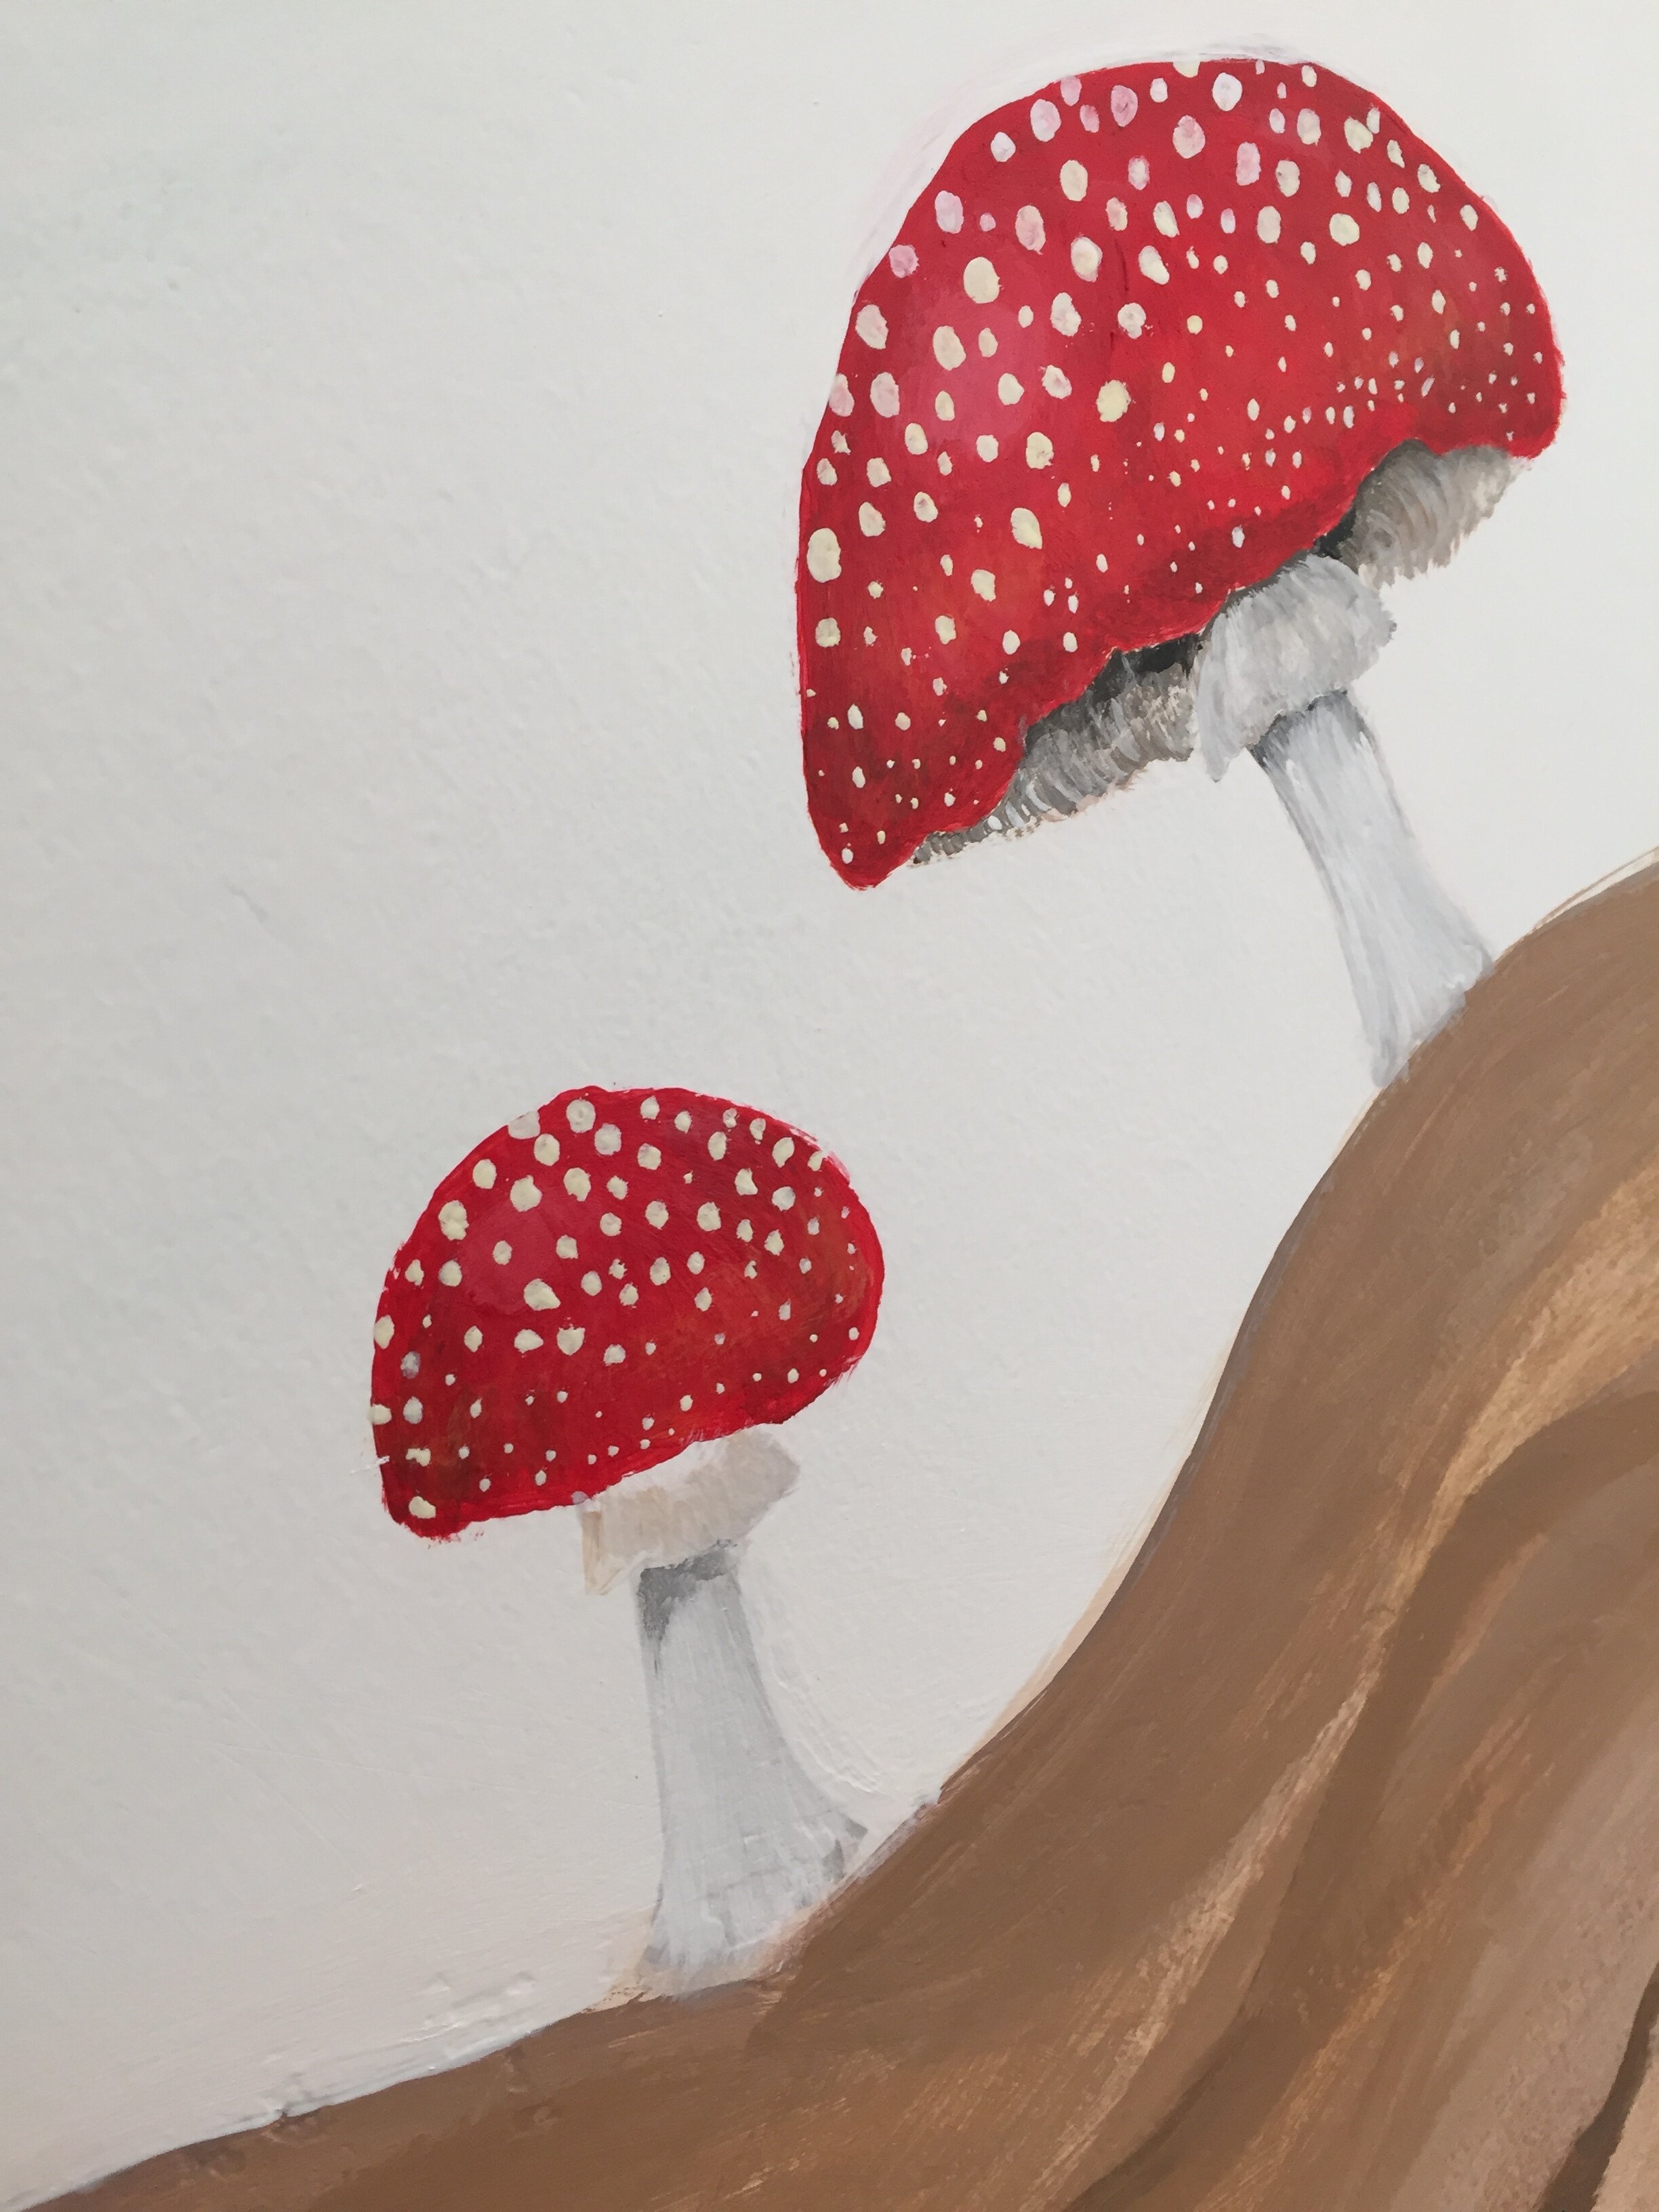  TOADSTOOLS - Snippet from home mural . 2021 